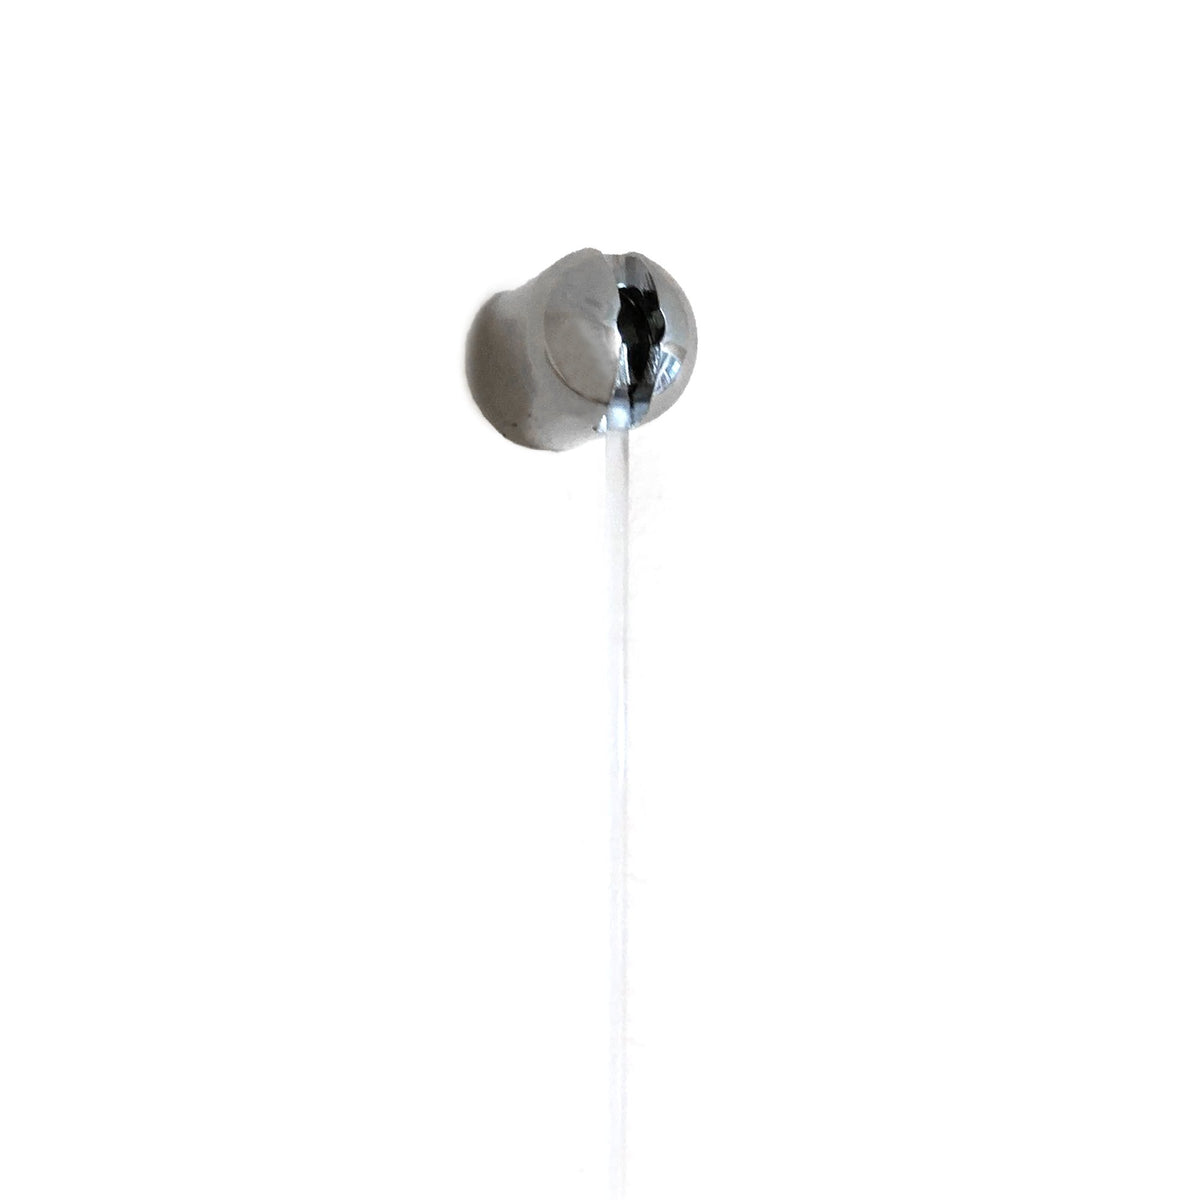 Stand Alone Gallery Nylon Cable - S - GS3 - N72 - Picture Hang Solutions